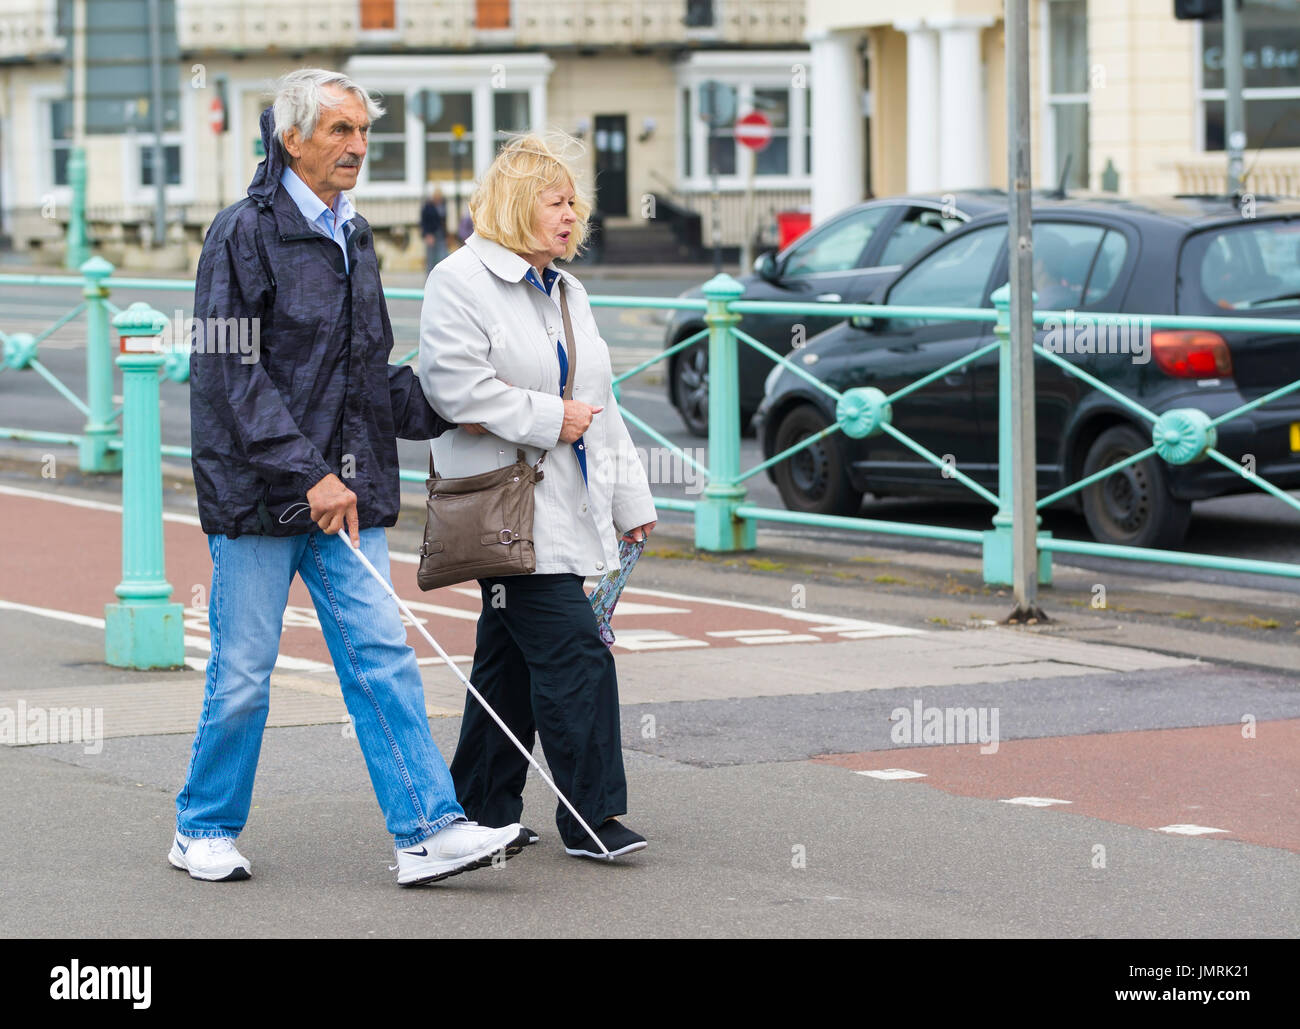 Elderly blind man walking with a white stick with help from a lady. Stock Photo